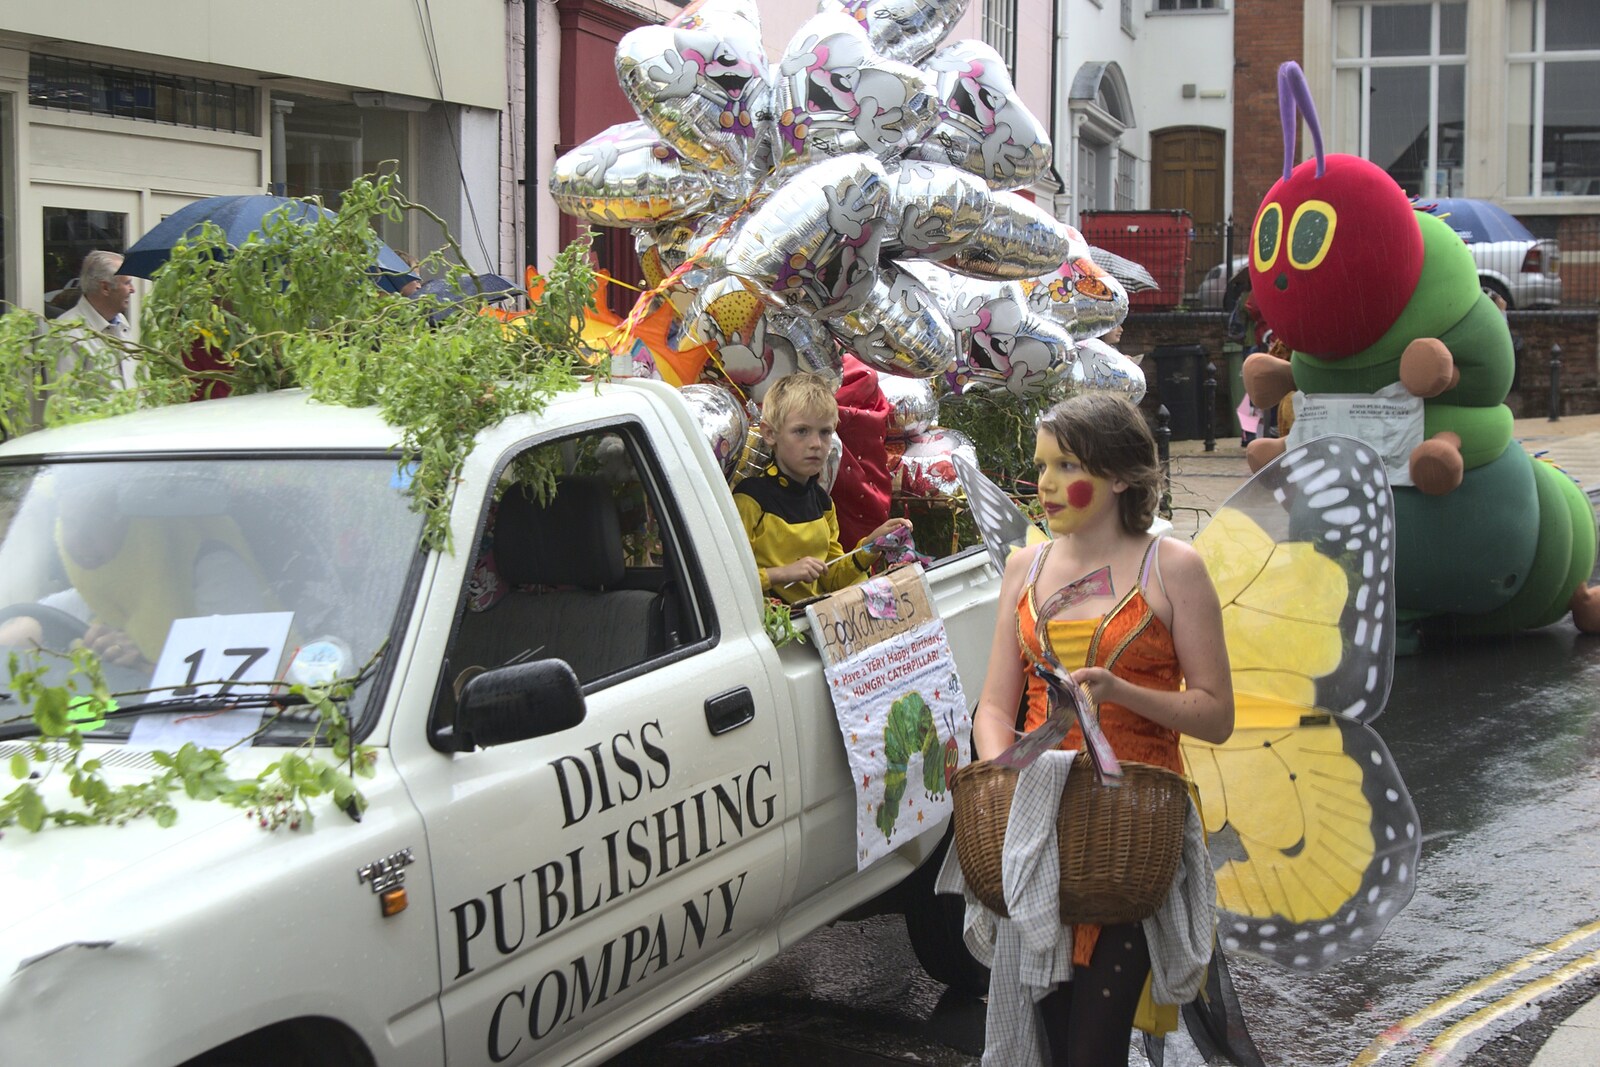 A van full of silver balloons from Diss Carnival Procession, Diss, Norfolk - 21st June 2009